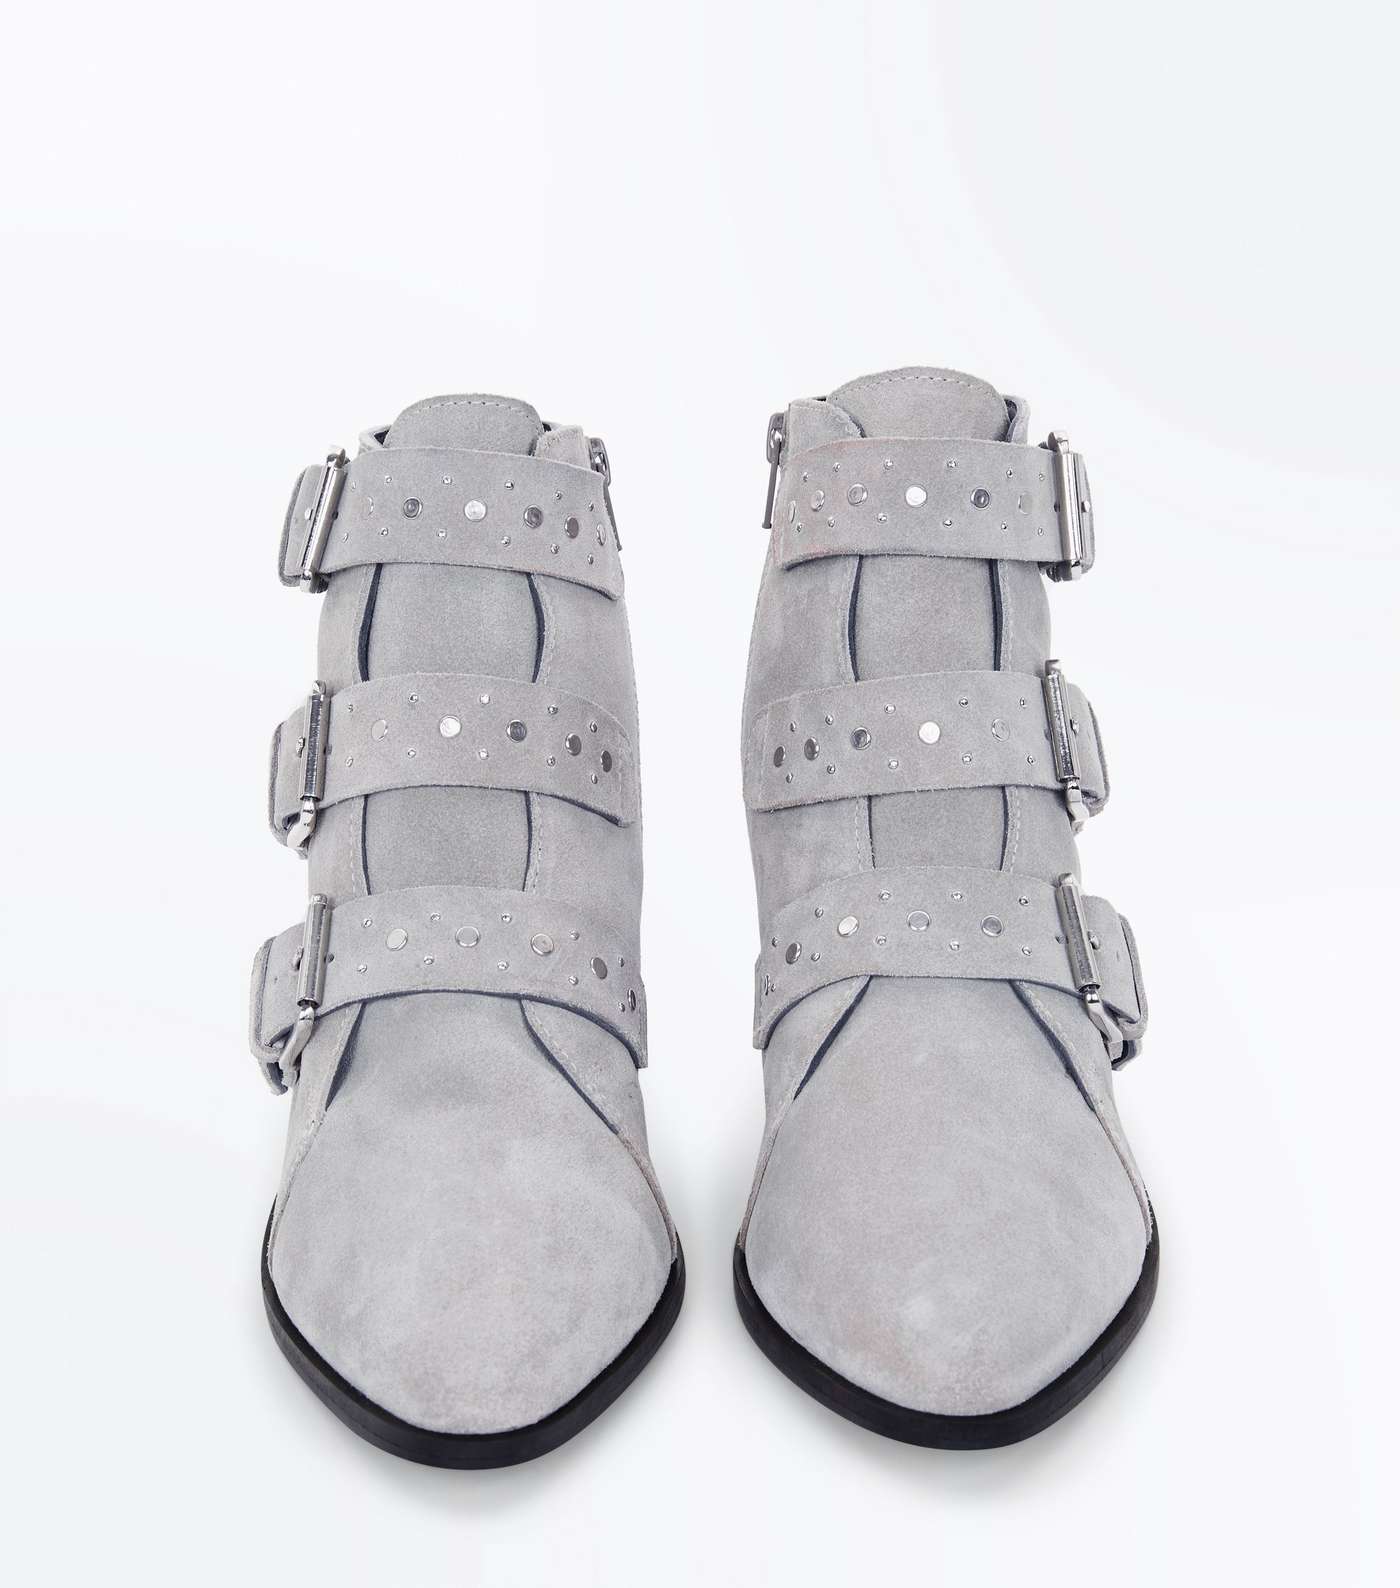 Grey Premium Suede Stud Buckle Ankle Boots Image 4